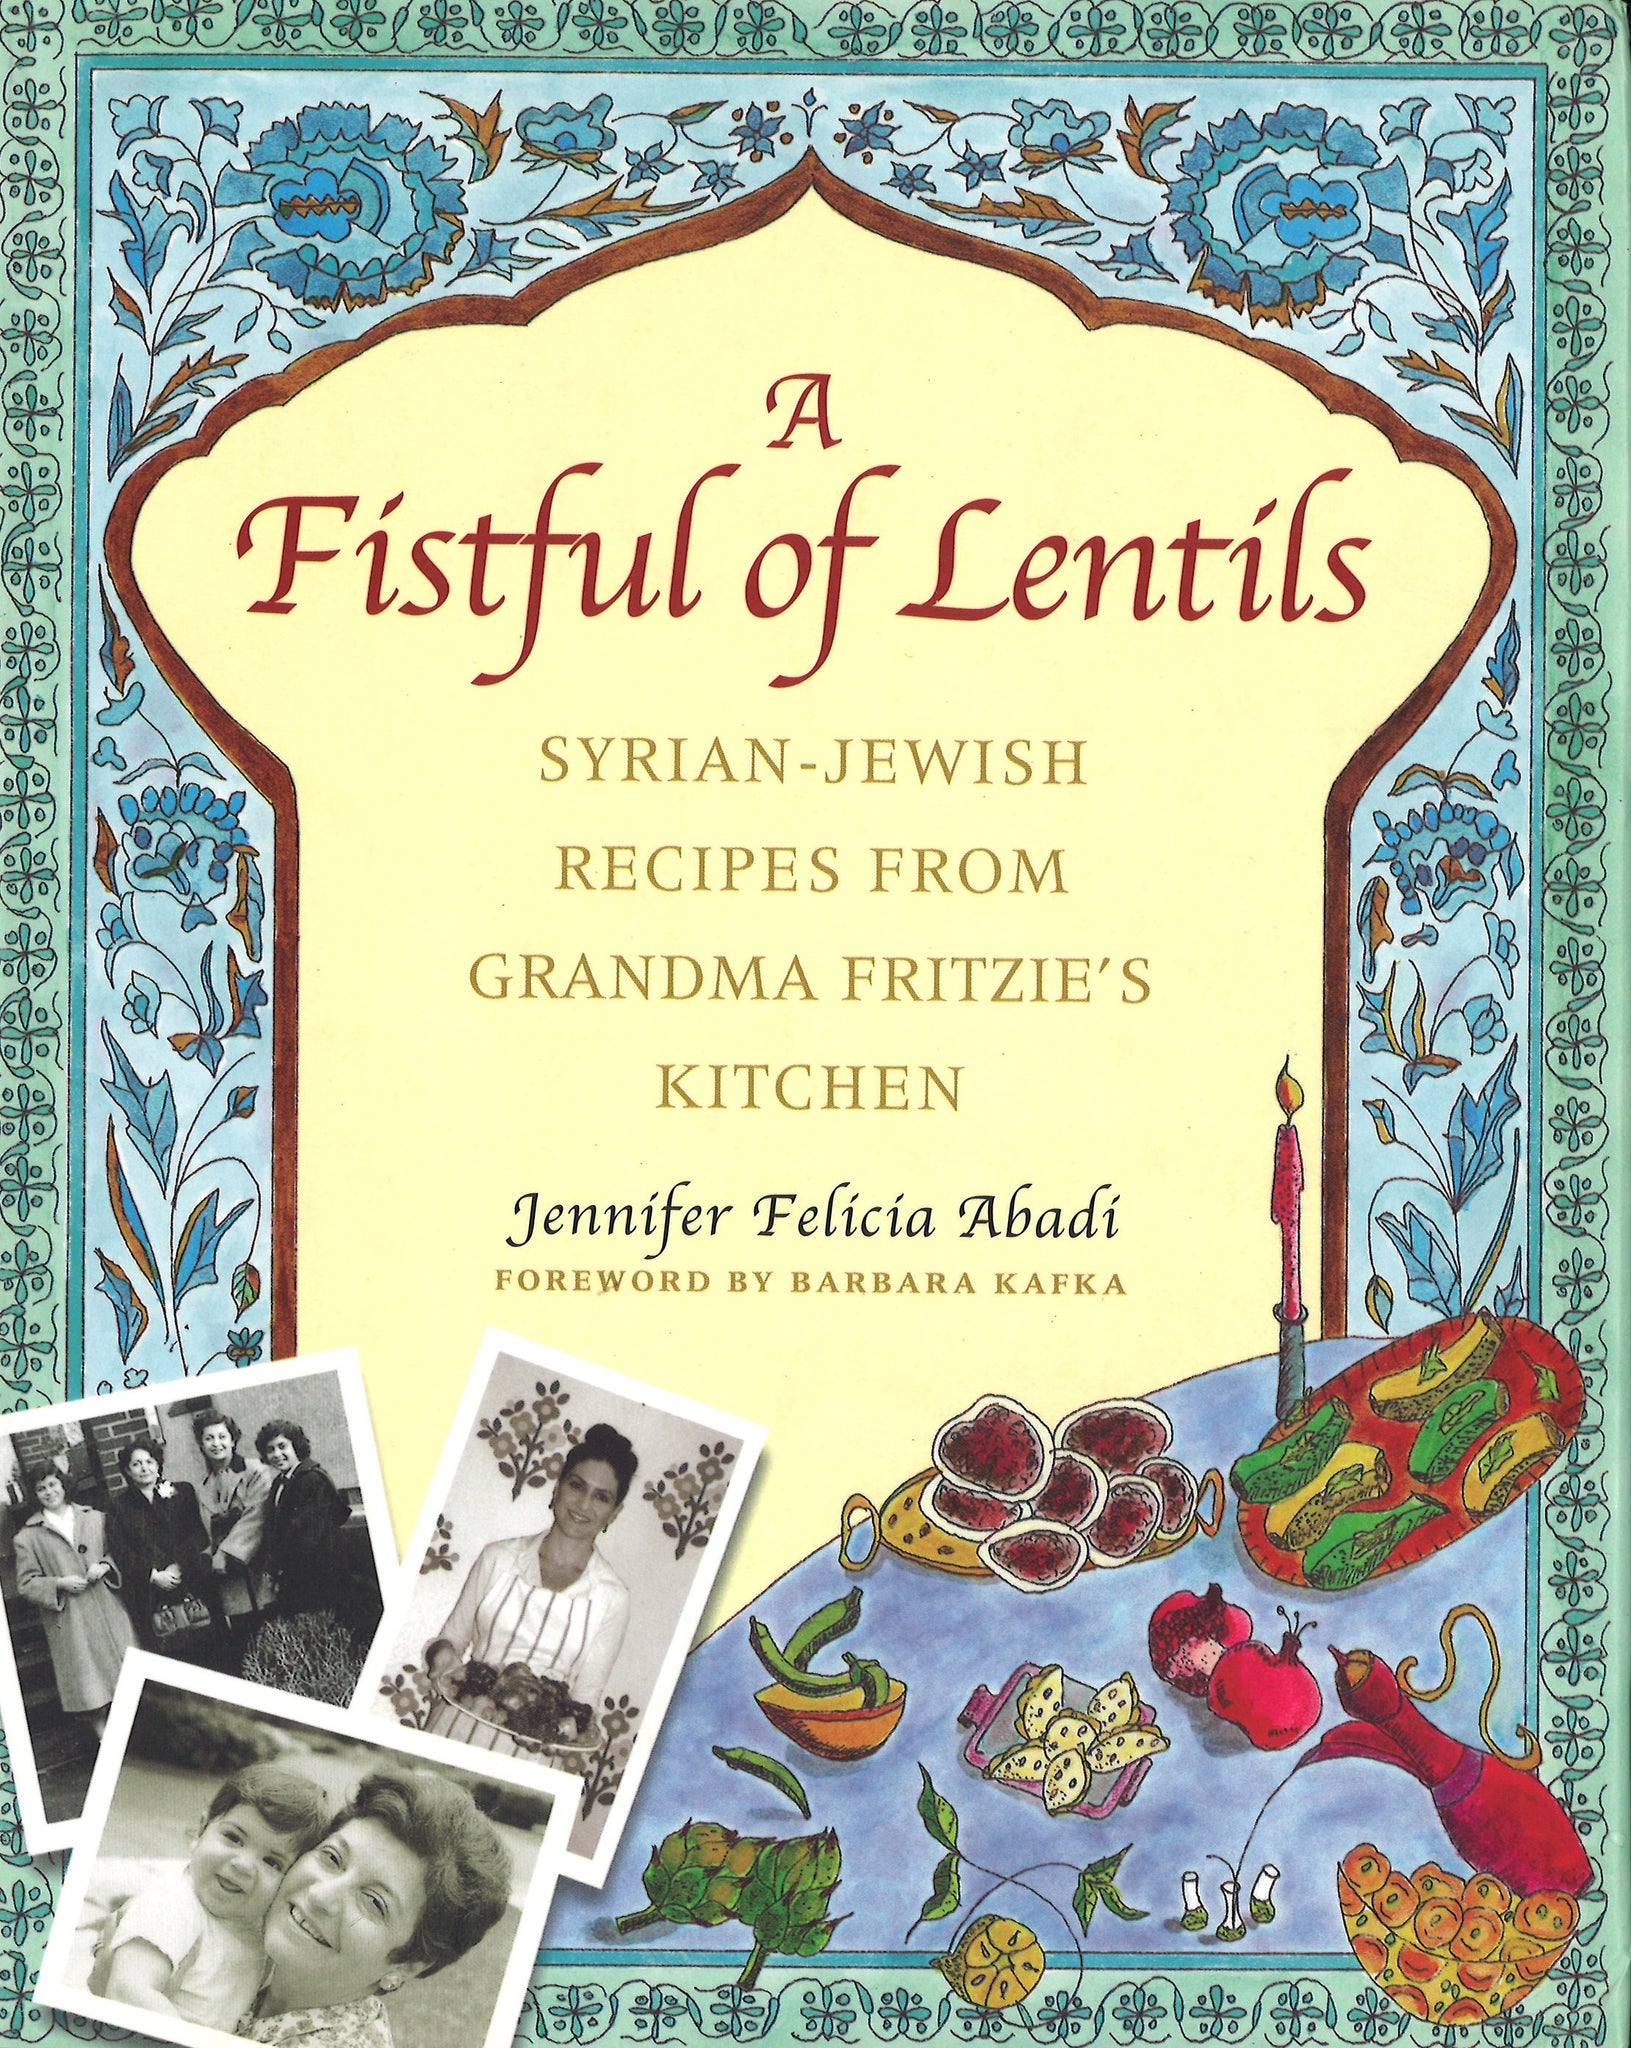 FISTFUL OF LENTILS: Syrian-Jewish Recipes from Grandma Fritzie's Kitchen